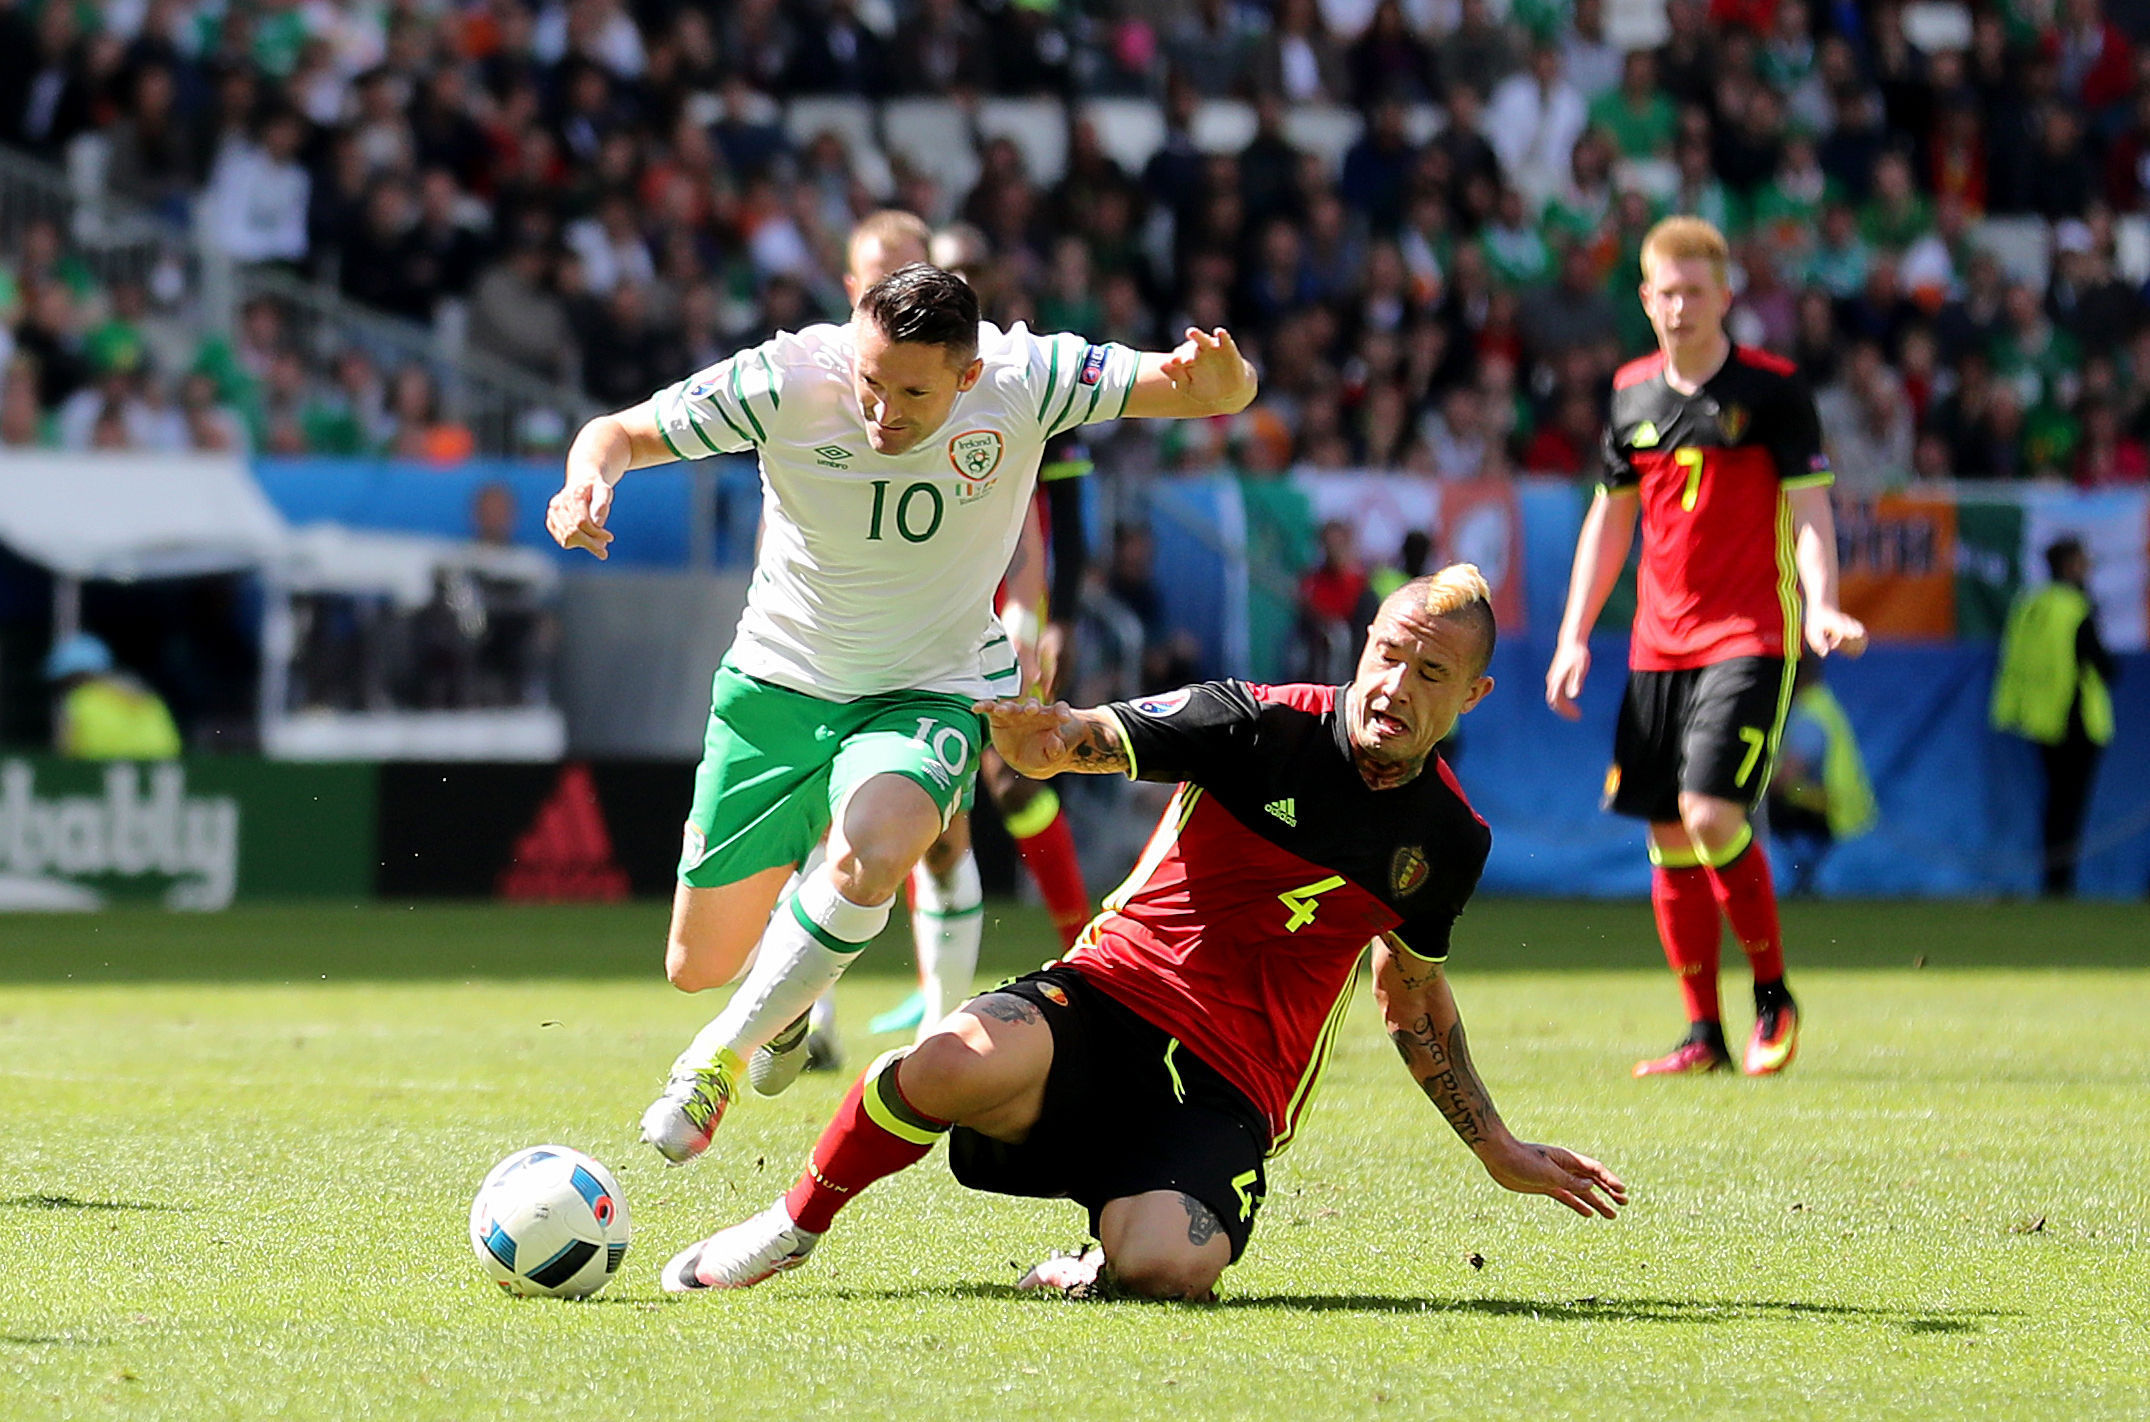 Republic of Ireland's Robbie Keane (left) and Belgium's Radja Nainggolan (right) battle for the ball during the UEFA Euro 2016, Group E match (PA)